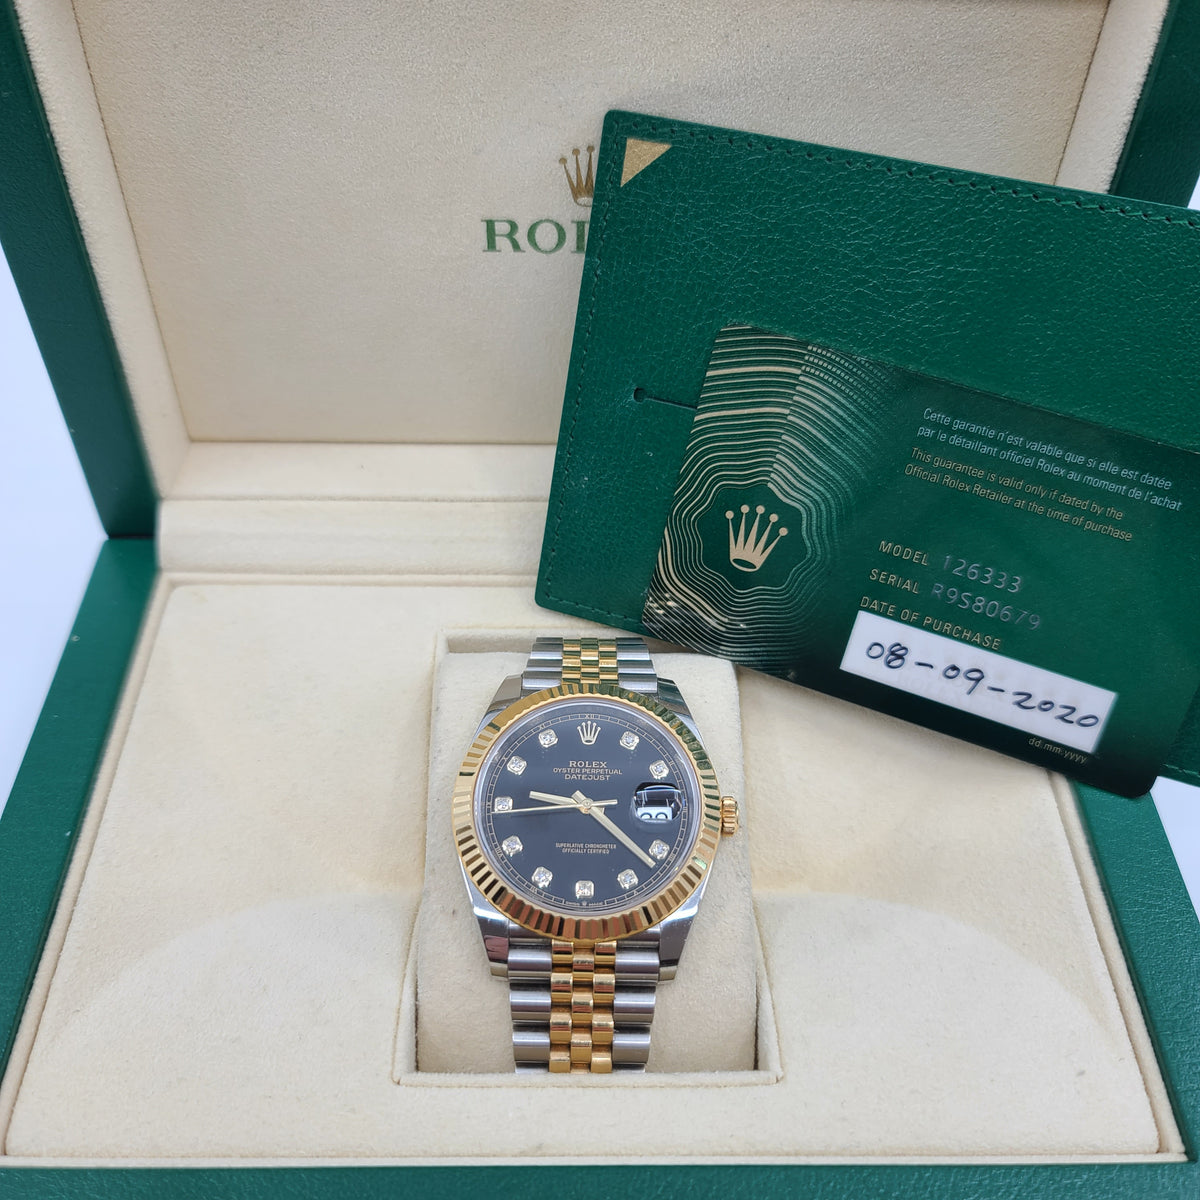 DATEJUST 41 Oyster, 41 mm, Oystersteel and yellow gold